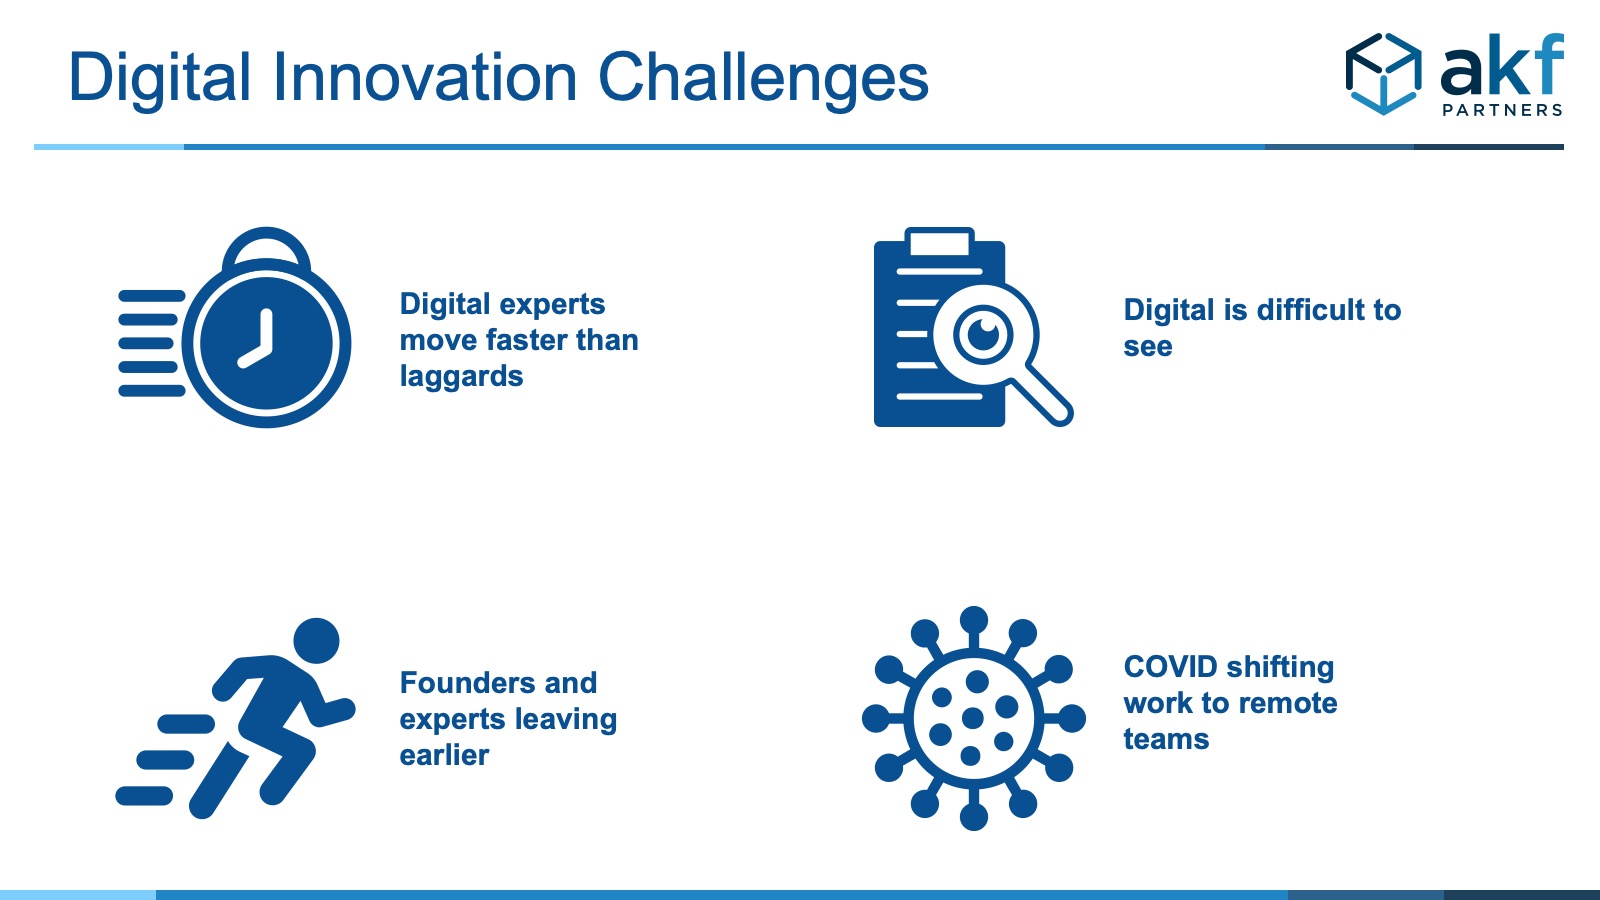 Challenges to Digital Innovation